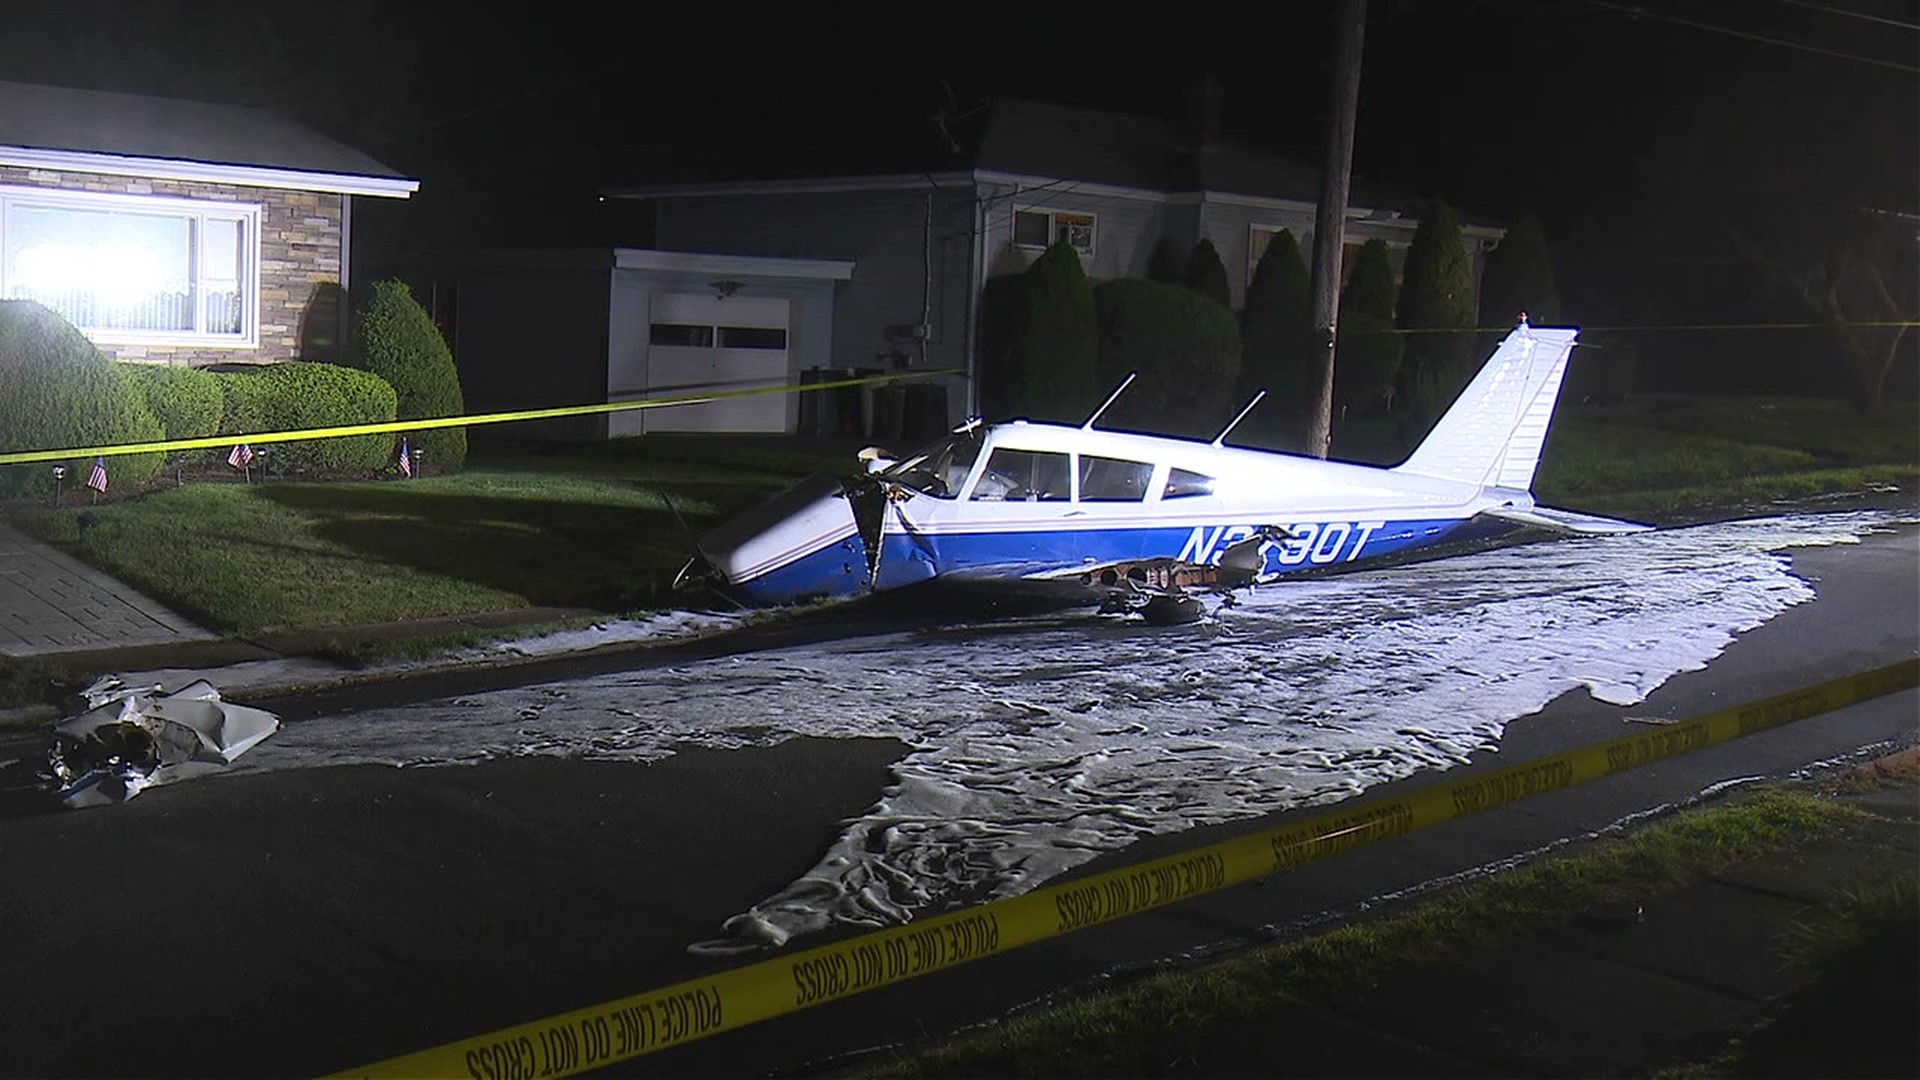 The plane crash-landed on a street in Moosic in September of 2020 and knocked out power to the area. The NTSB has released a report on the crash.